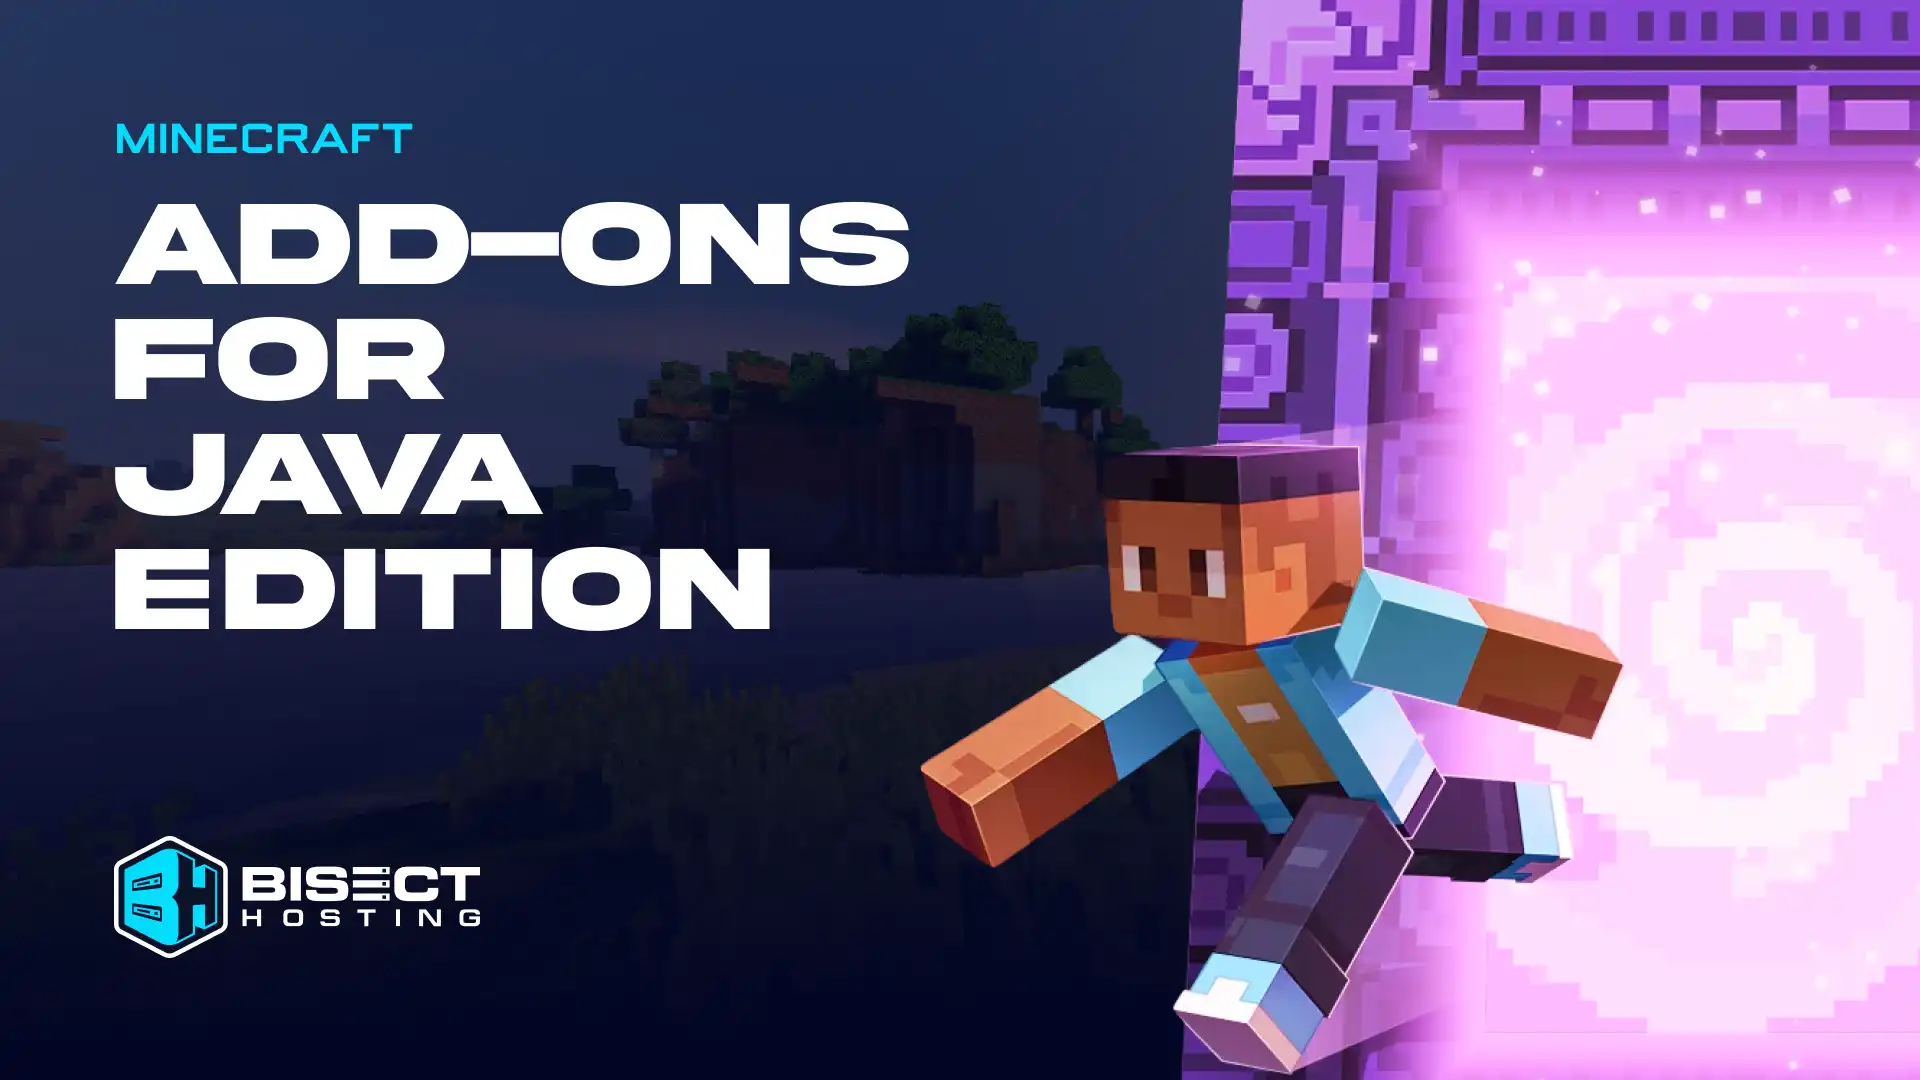 Can Minecraft Add Ons Be Used on Java Edition?